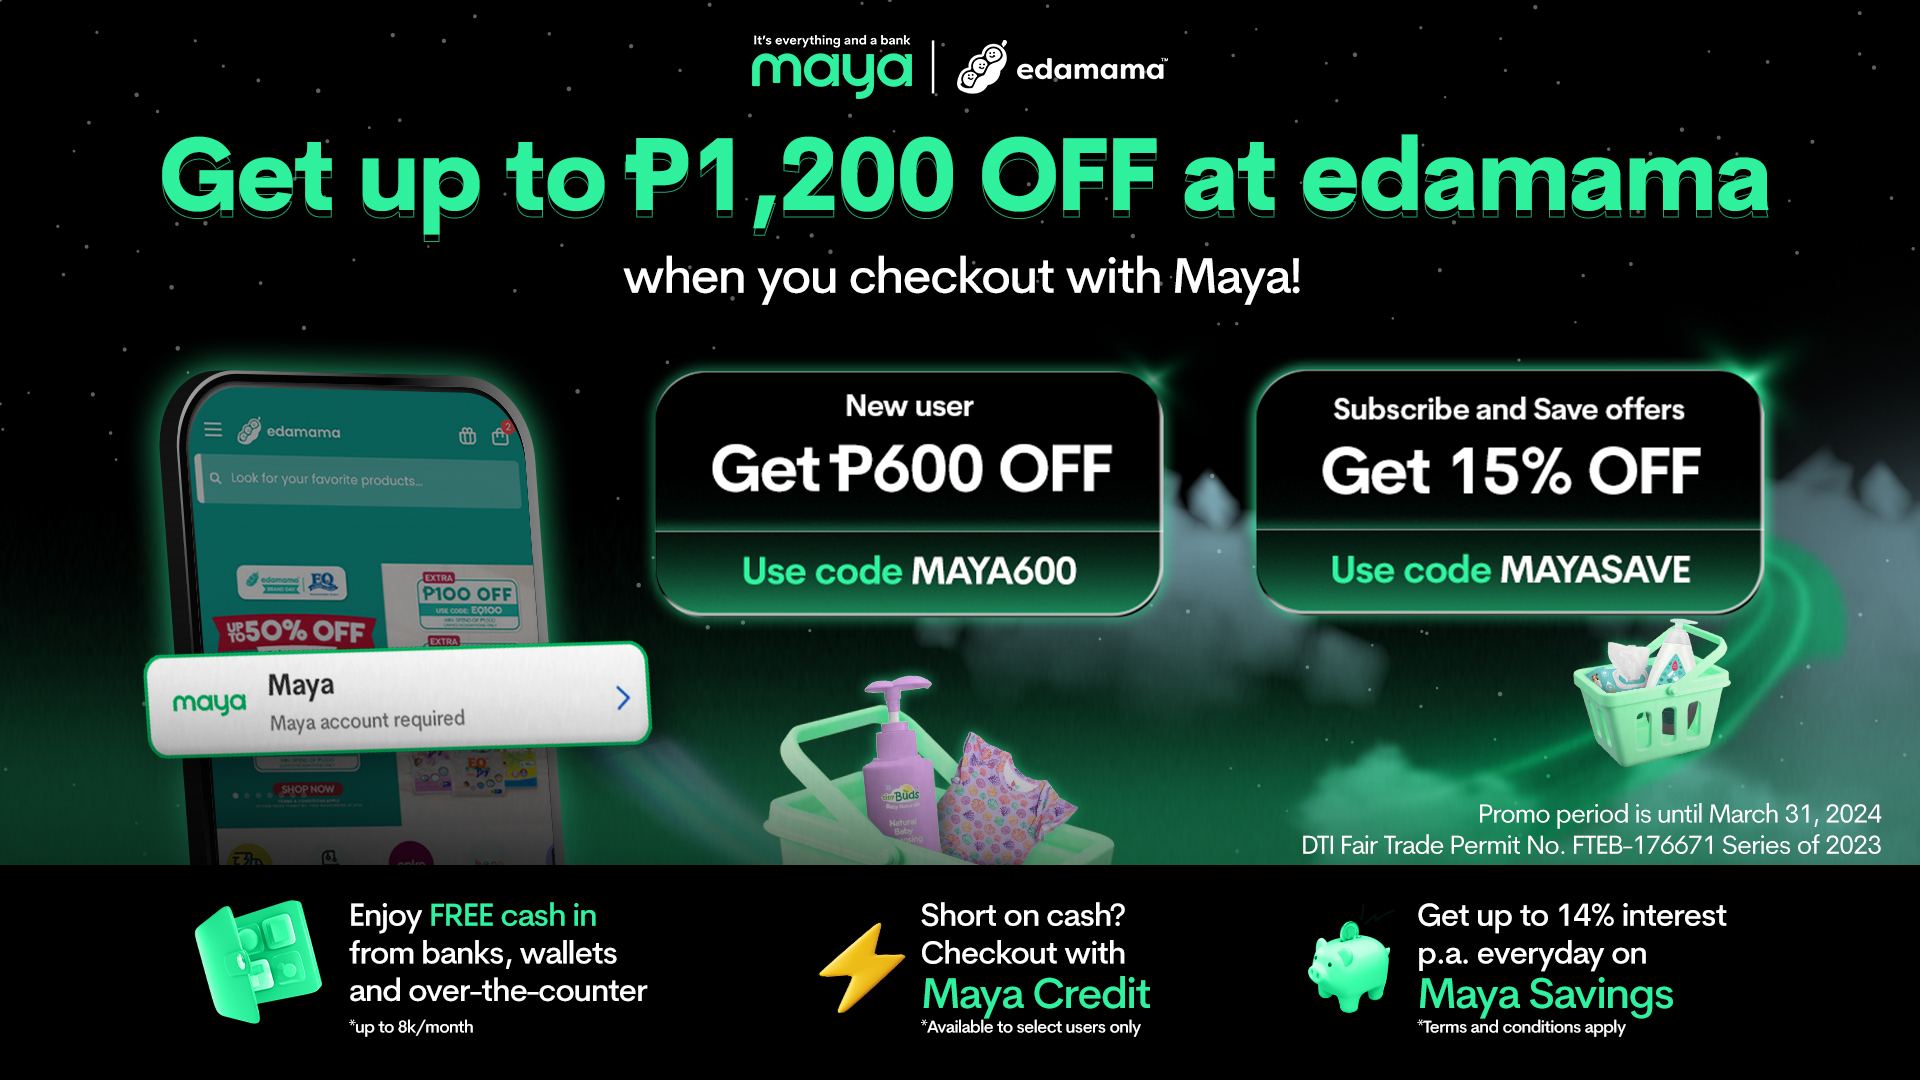 Save up to 15% OFF when you checkout with Maya on edamama!